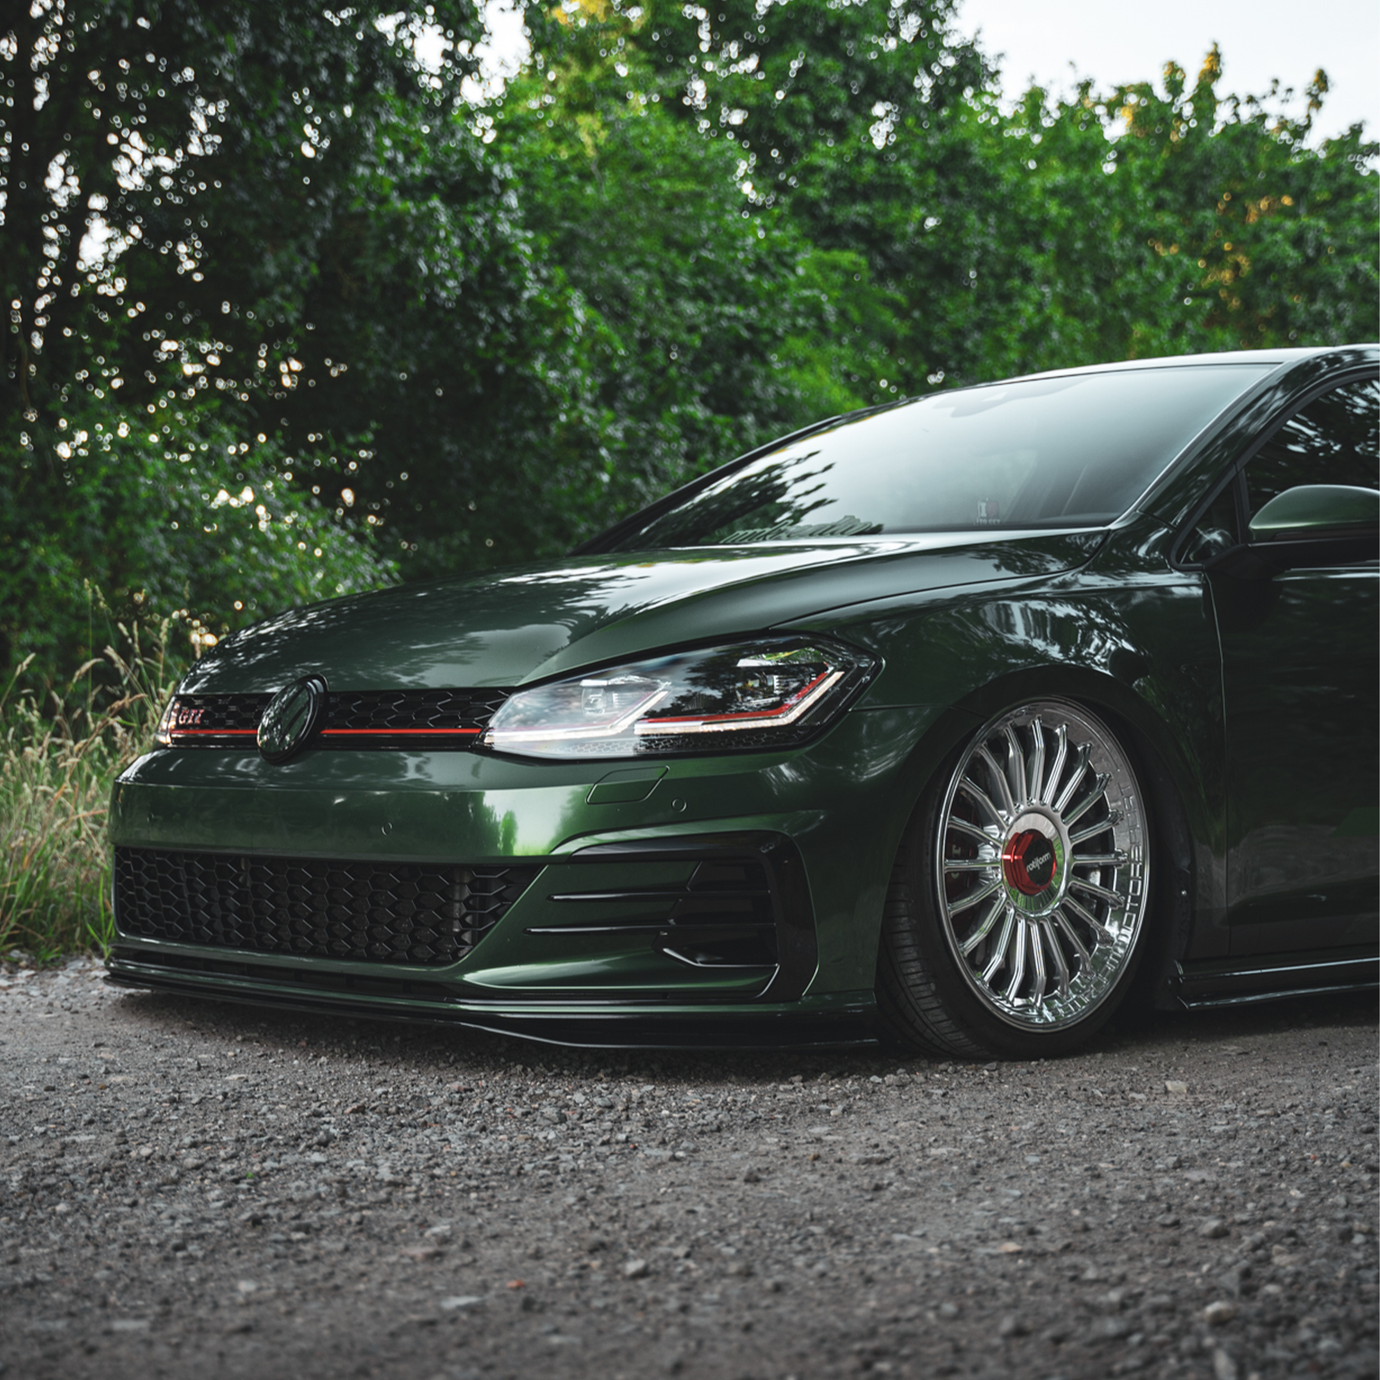 Sonoma Green Golf 7 GTI by @jakes_tcr